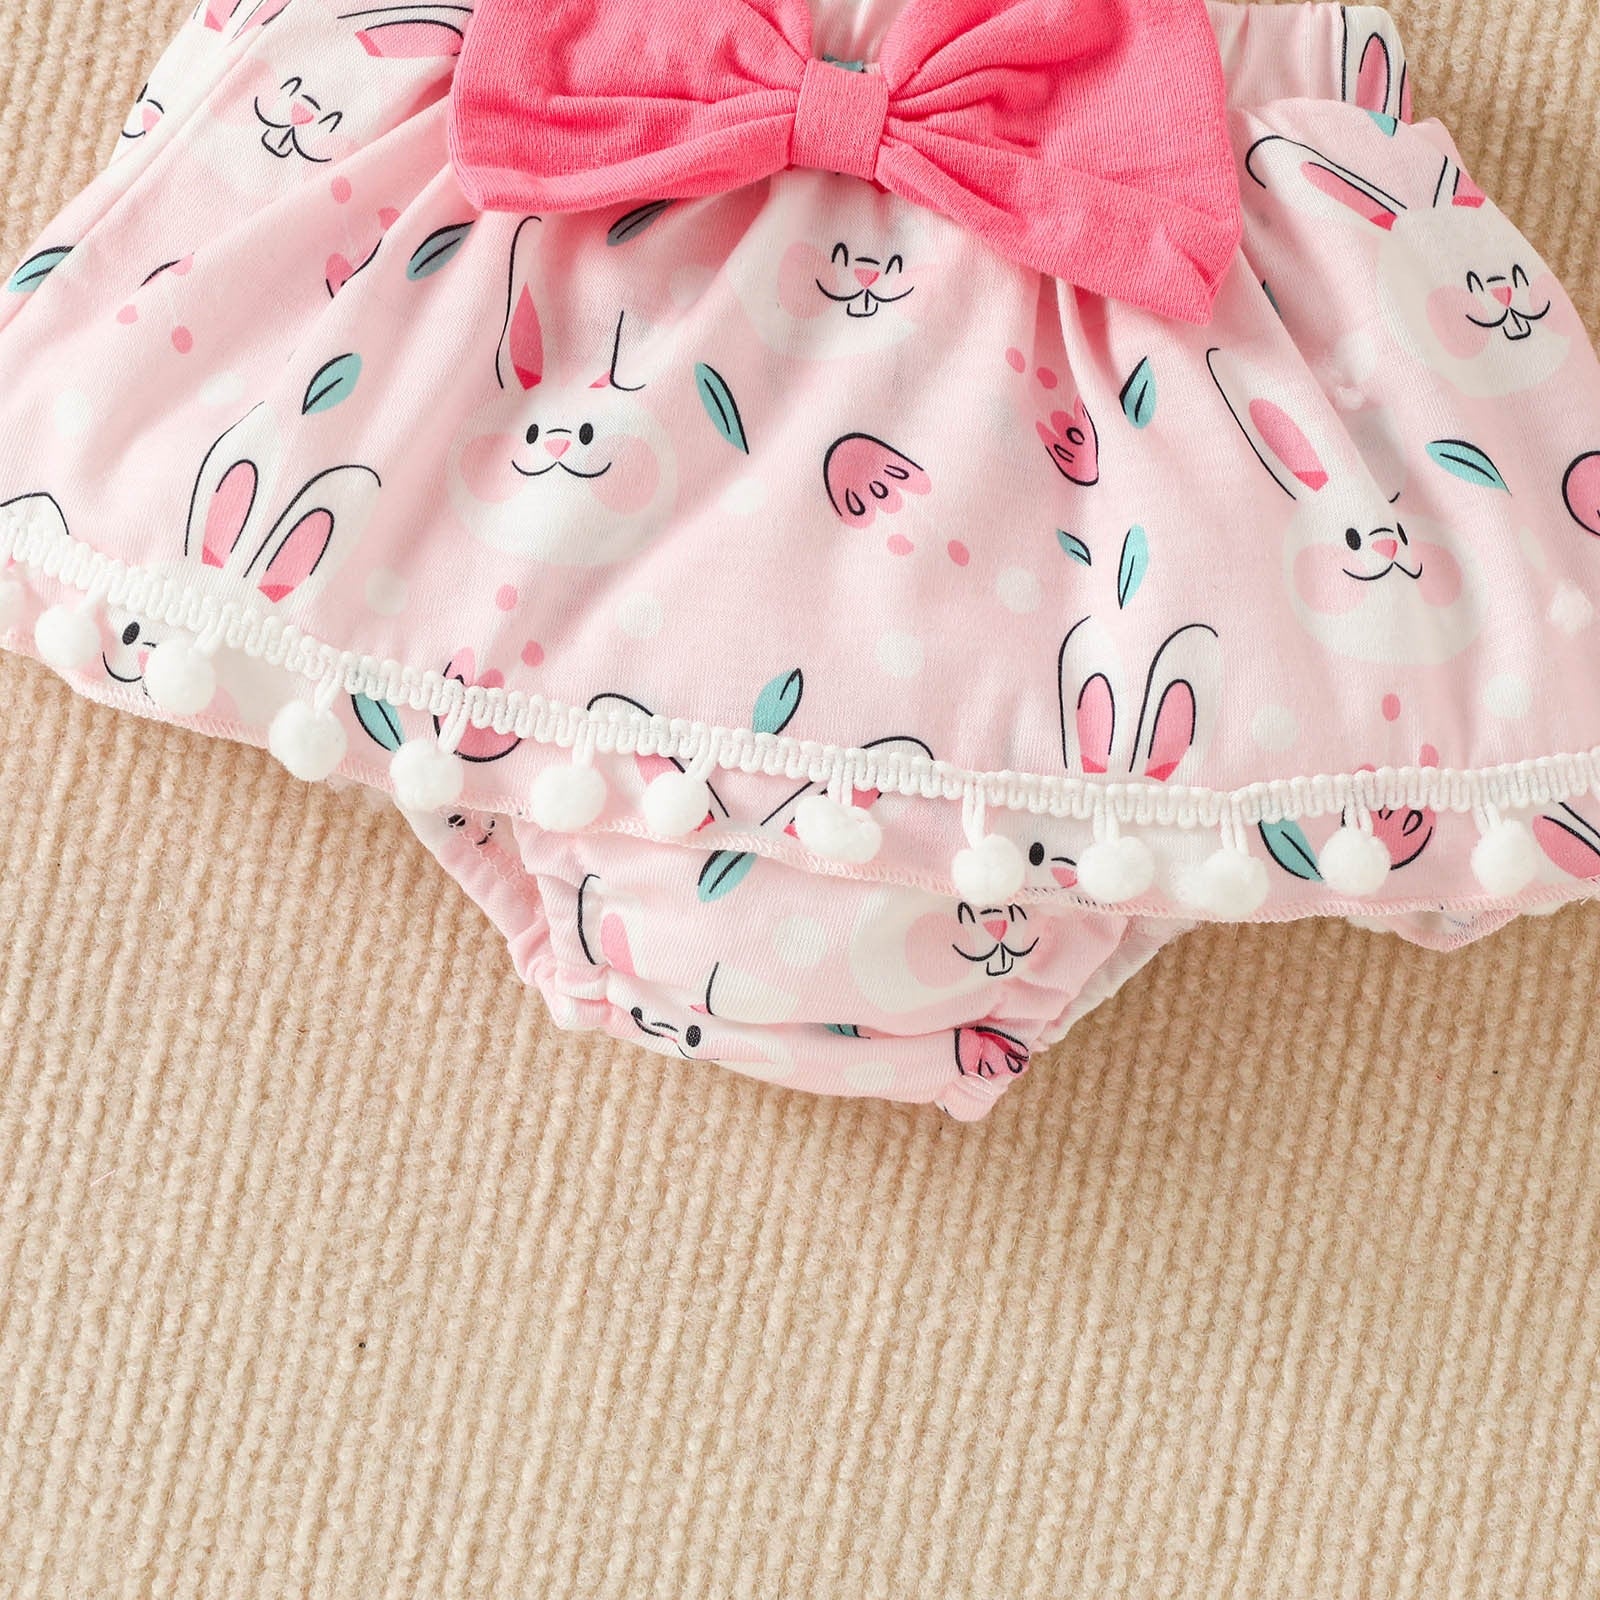 Celebrate Your Baby's First Easter with Our Adorable Outfit Sets